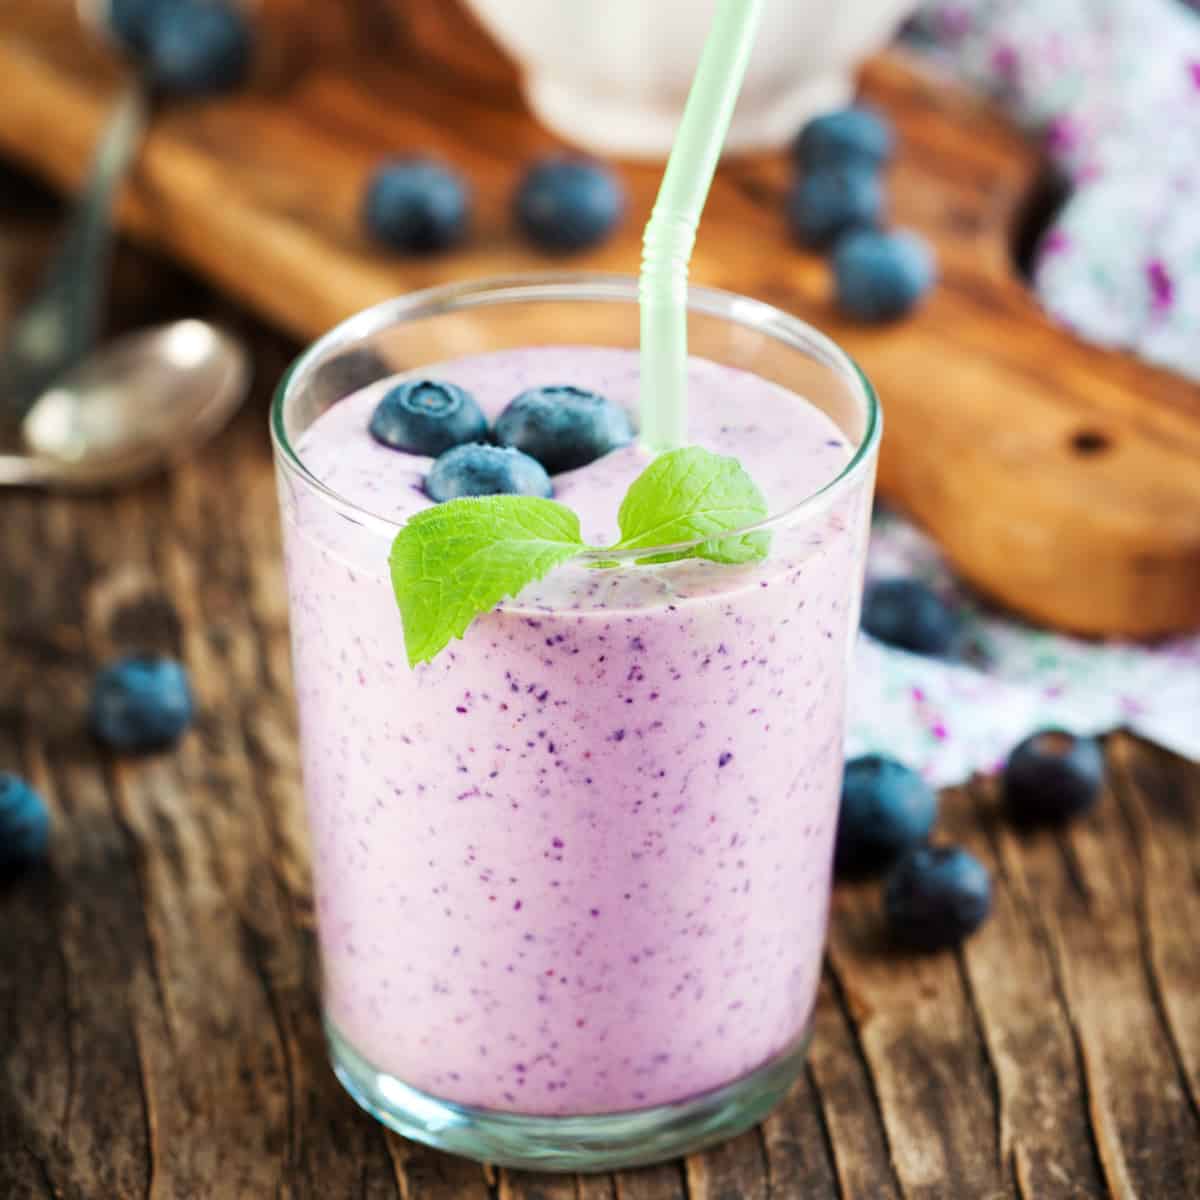 Blueberry Smoothie in a glass topped with whole blueberries. With a straw.